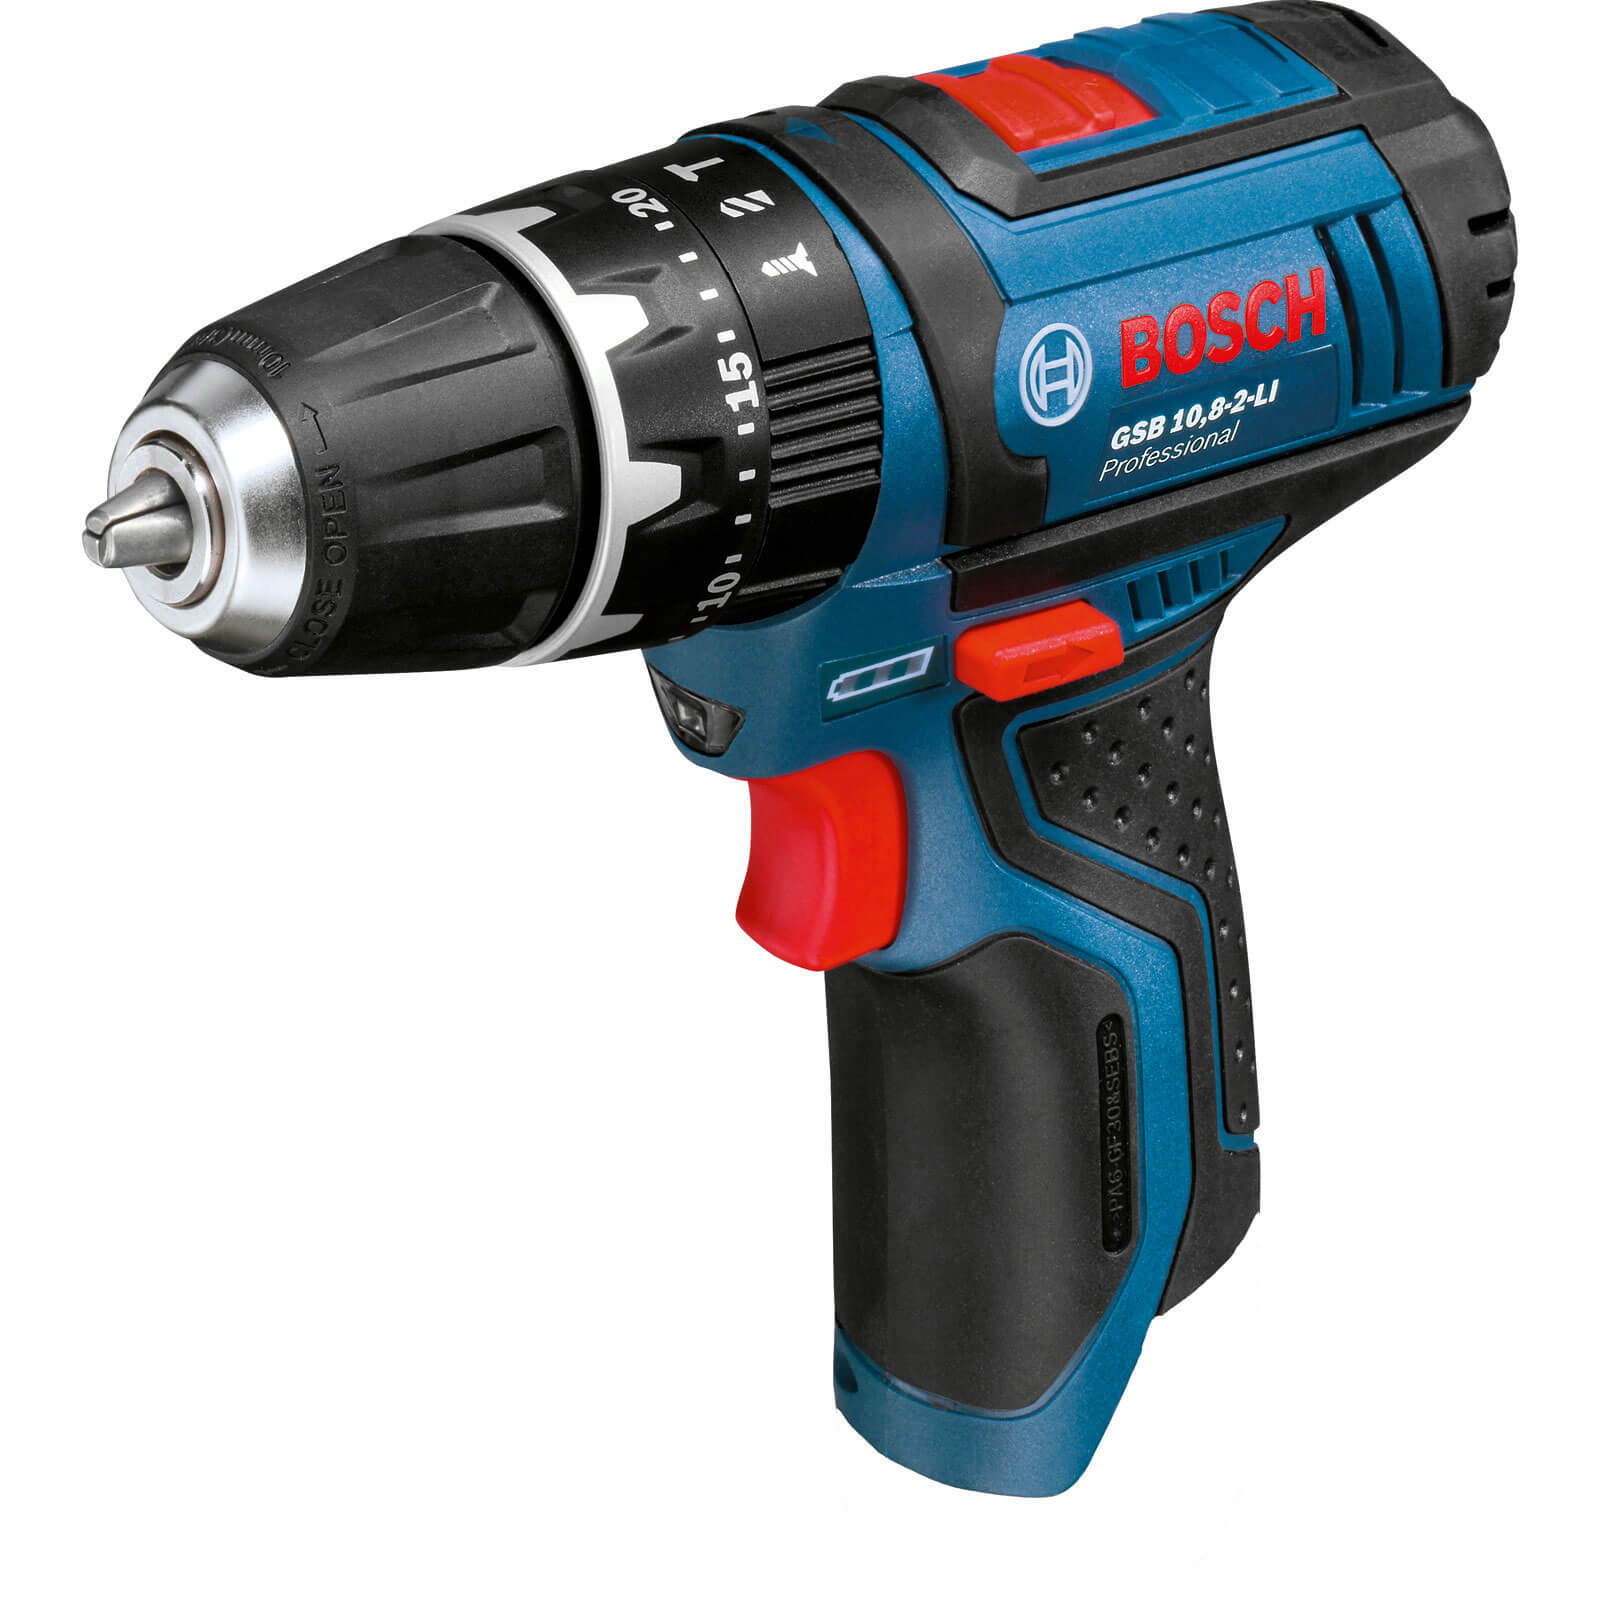 Bosch GSB 10.8-2-LI 10.8v Cordless Combi Drill without Battery or Charger